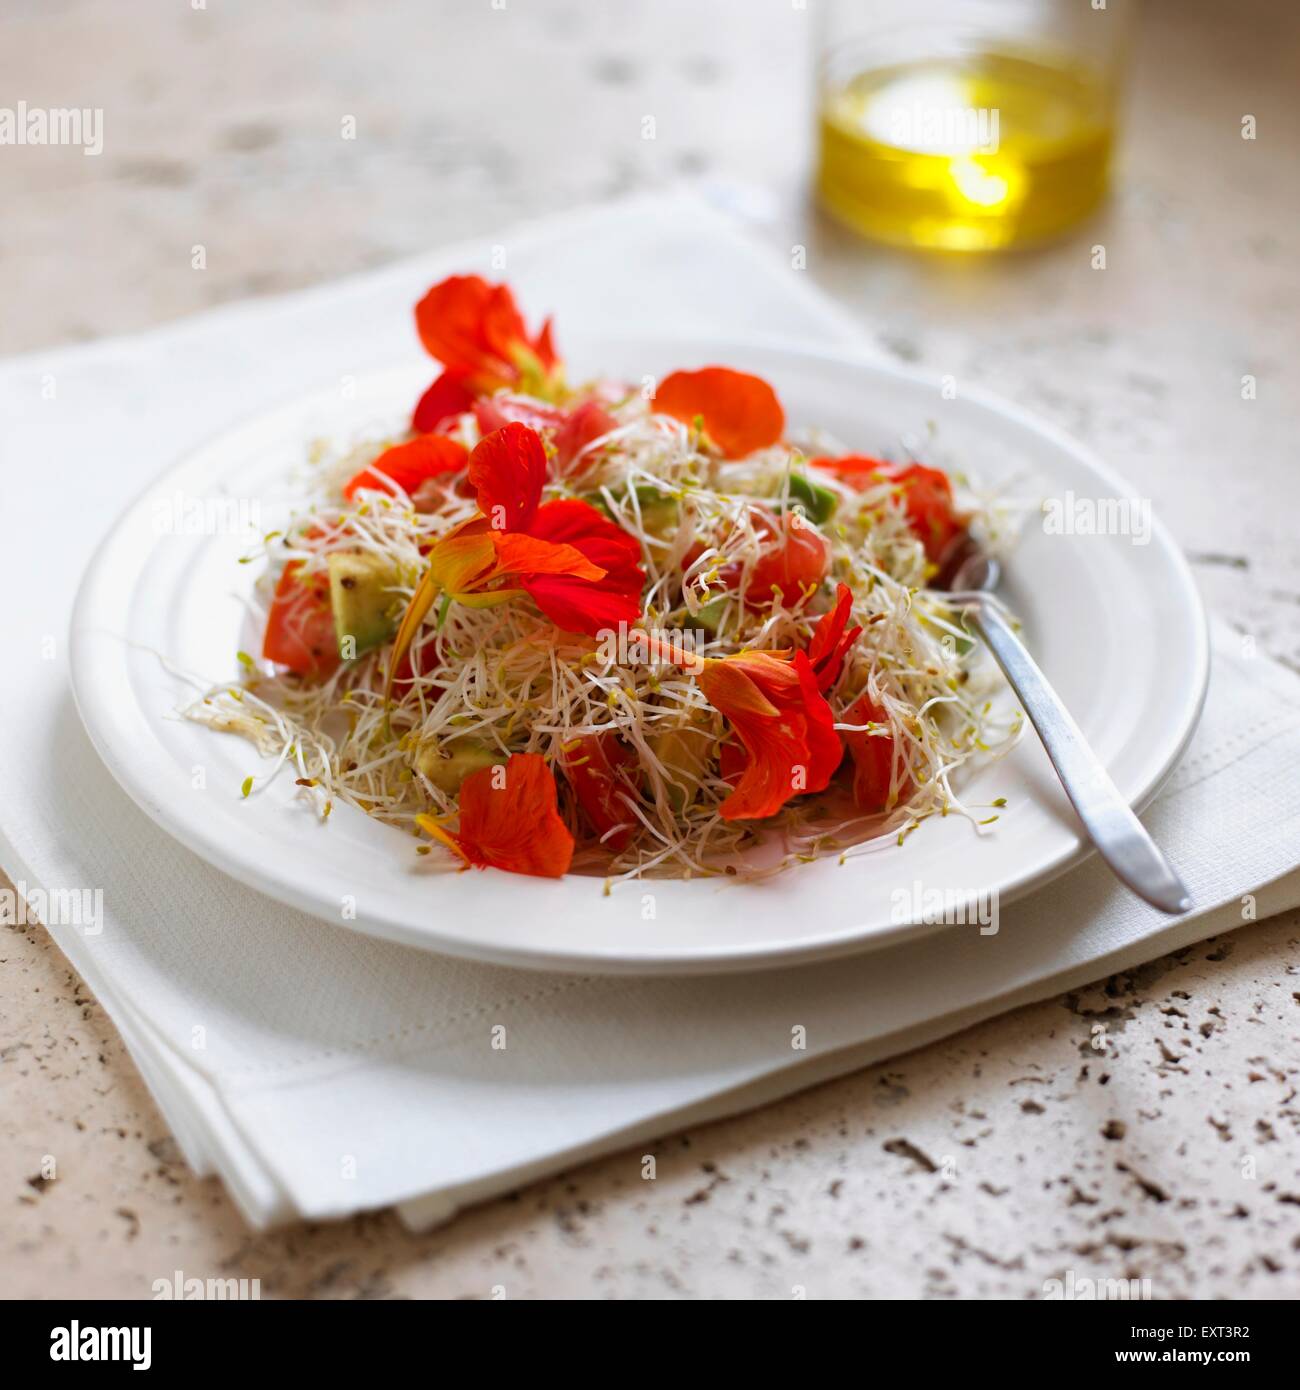 Salad of nasturtium flowers and sprouts on a plate Stock Photo